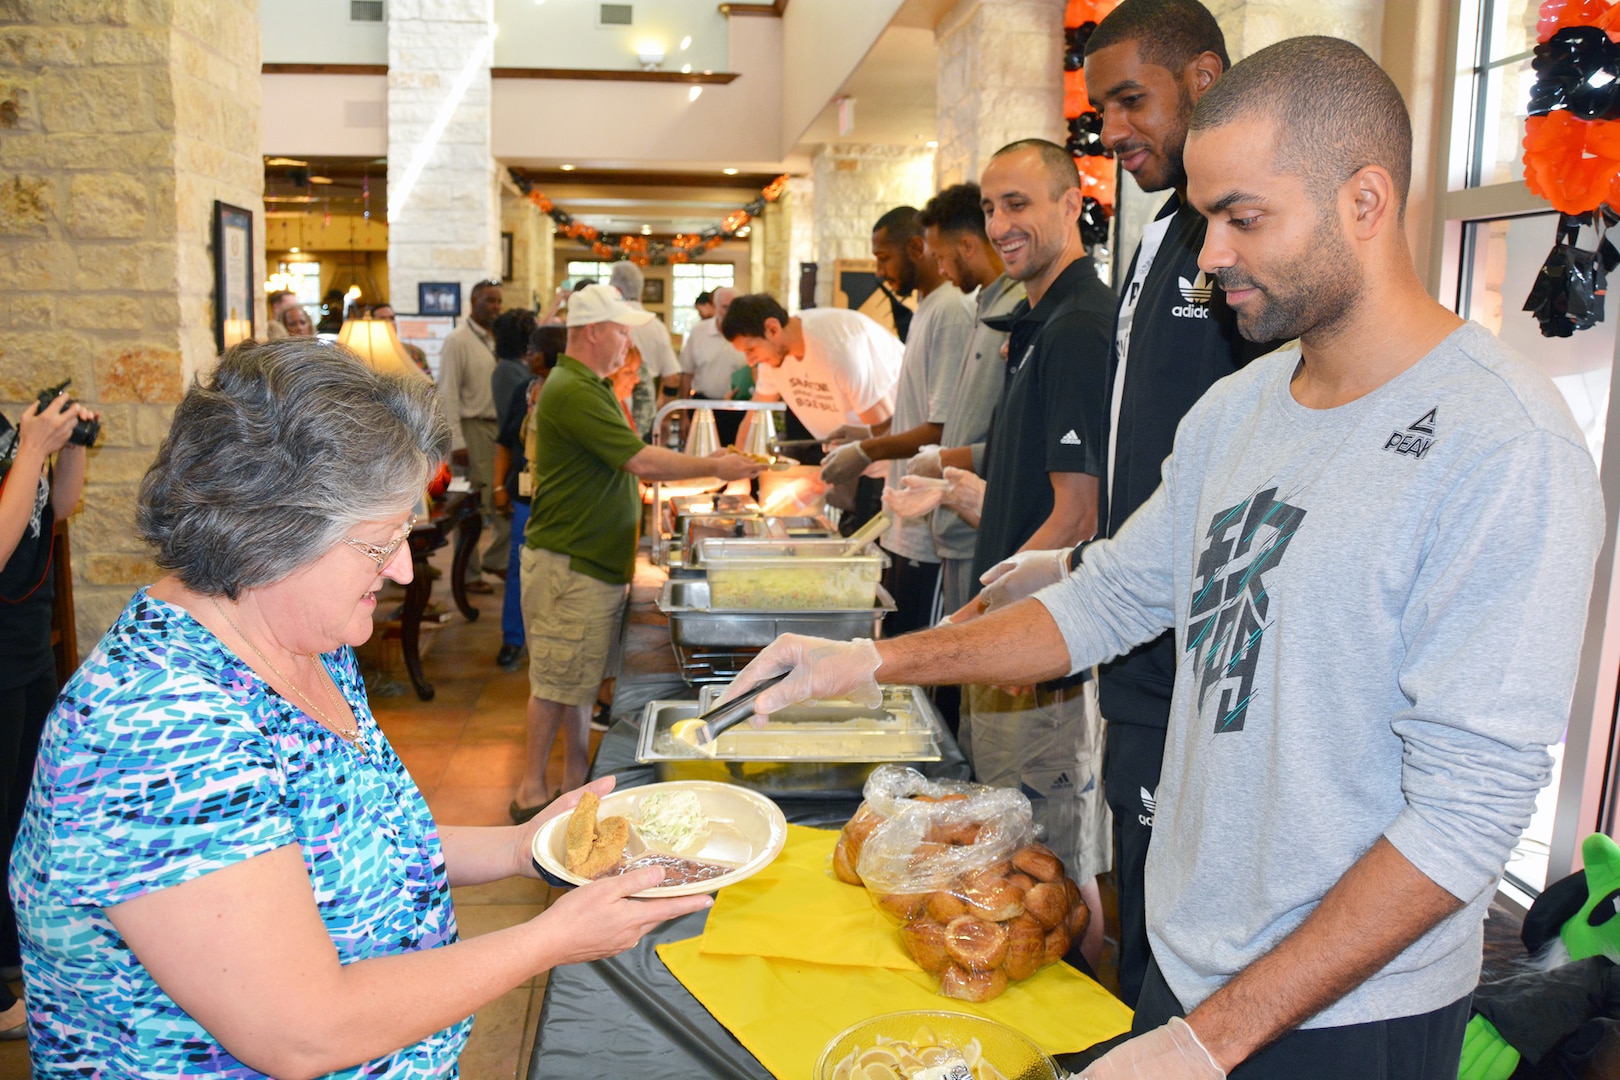 Spurs player Tony Parker (far right) and his teammates served lunch at the Warrior and Family Support Center Oct. 21. The team visited with warriors, family members and staff and signed autographs before heading over to the Center for the Intrepid to visit with patients and play wheelchair basketball.